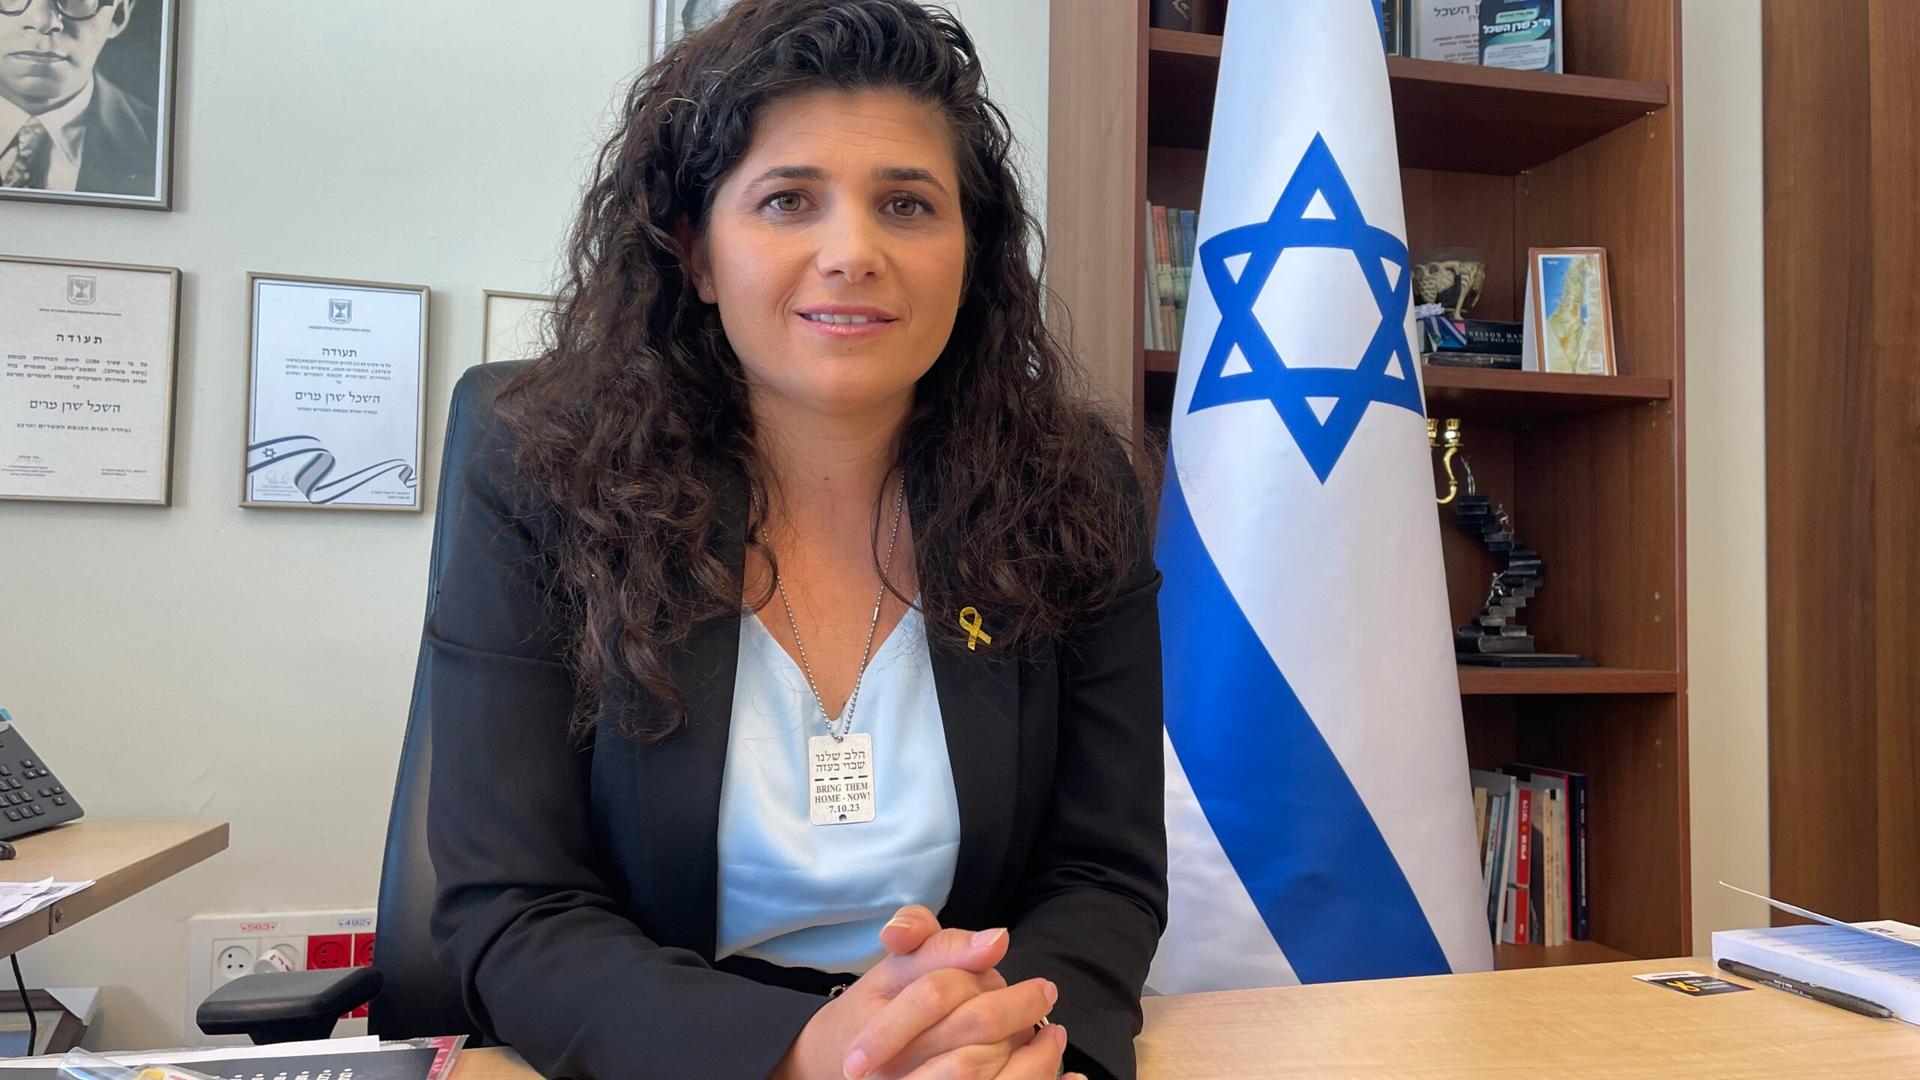 A woman wearing a light blue blouse with a black blazer sitting down next to an Israeli flag